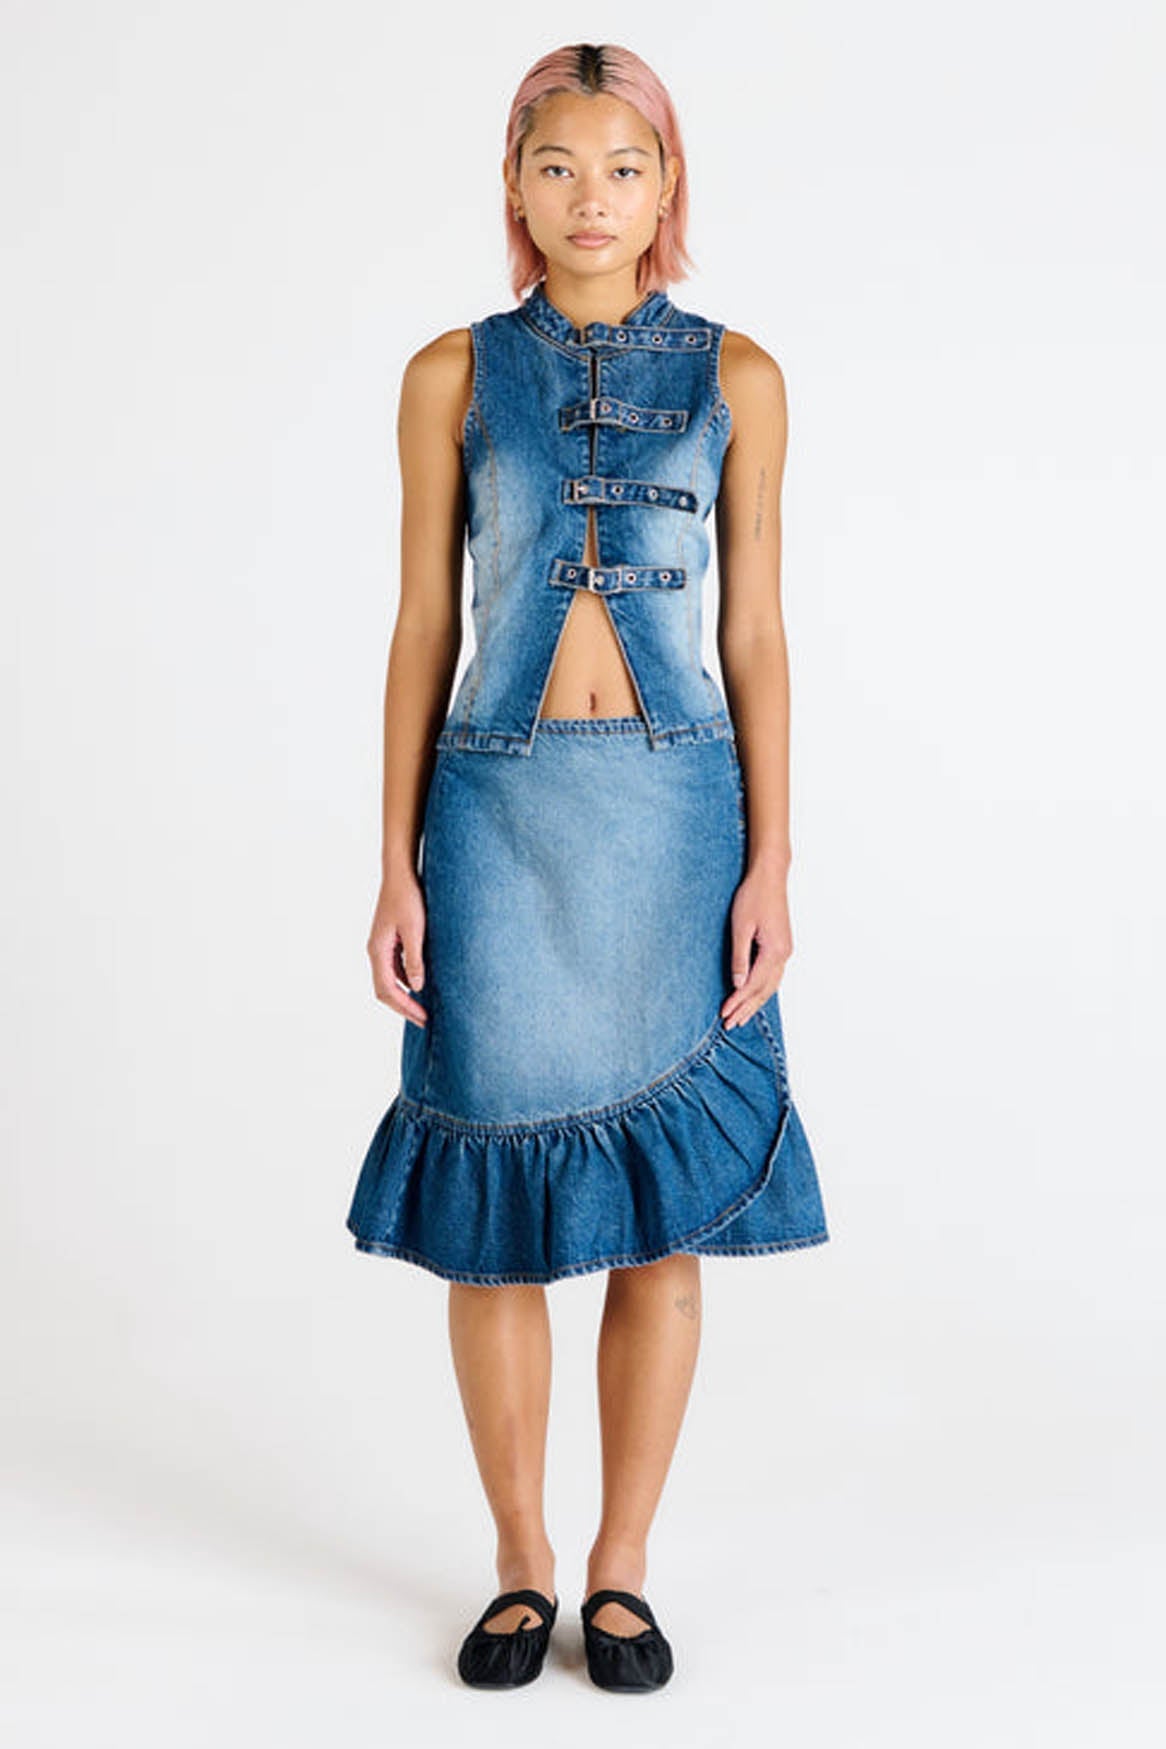 REIGN BUCKLE DENIM TOP - EXCLUSIVE Denim from THE RAGGED PRIEST - Just €69! SHOP NOW AT IAMINHATELOVE BOTH IN STORE FOR CYPRUS AND ONLINE WORLDWIDE @ IAMINHATELOVE.COM